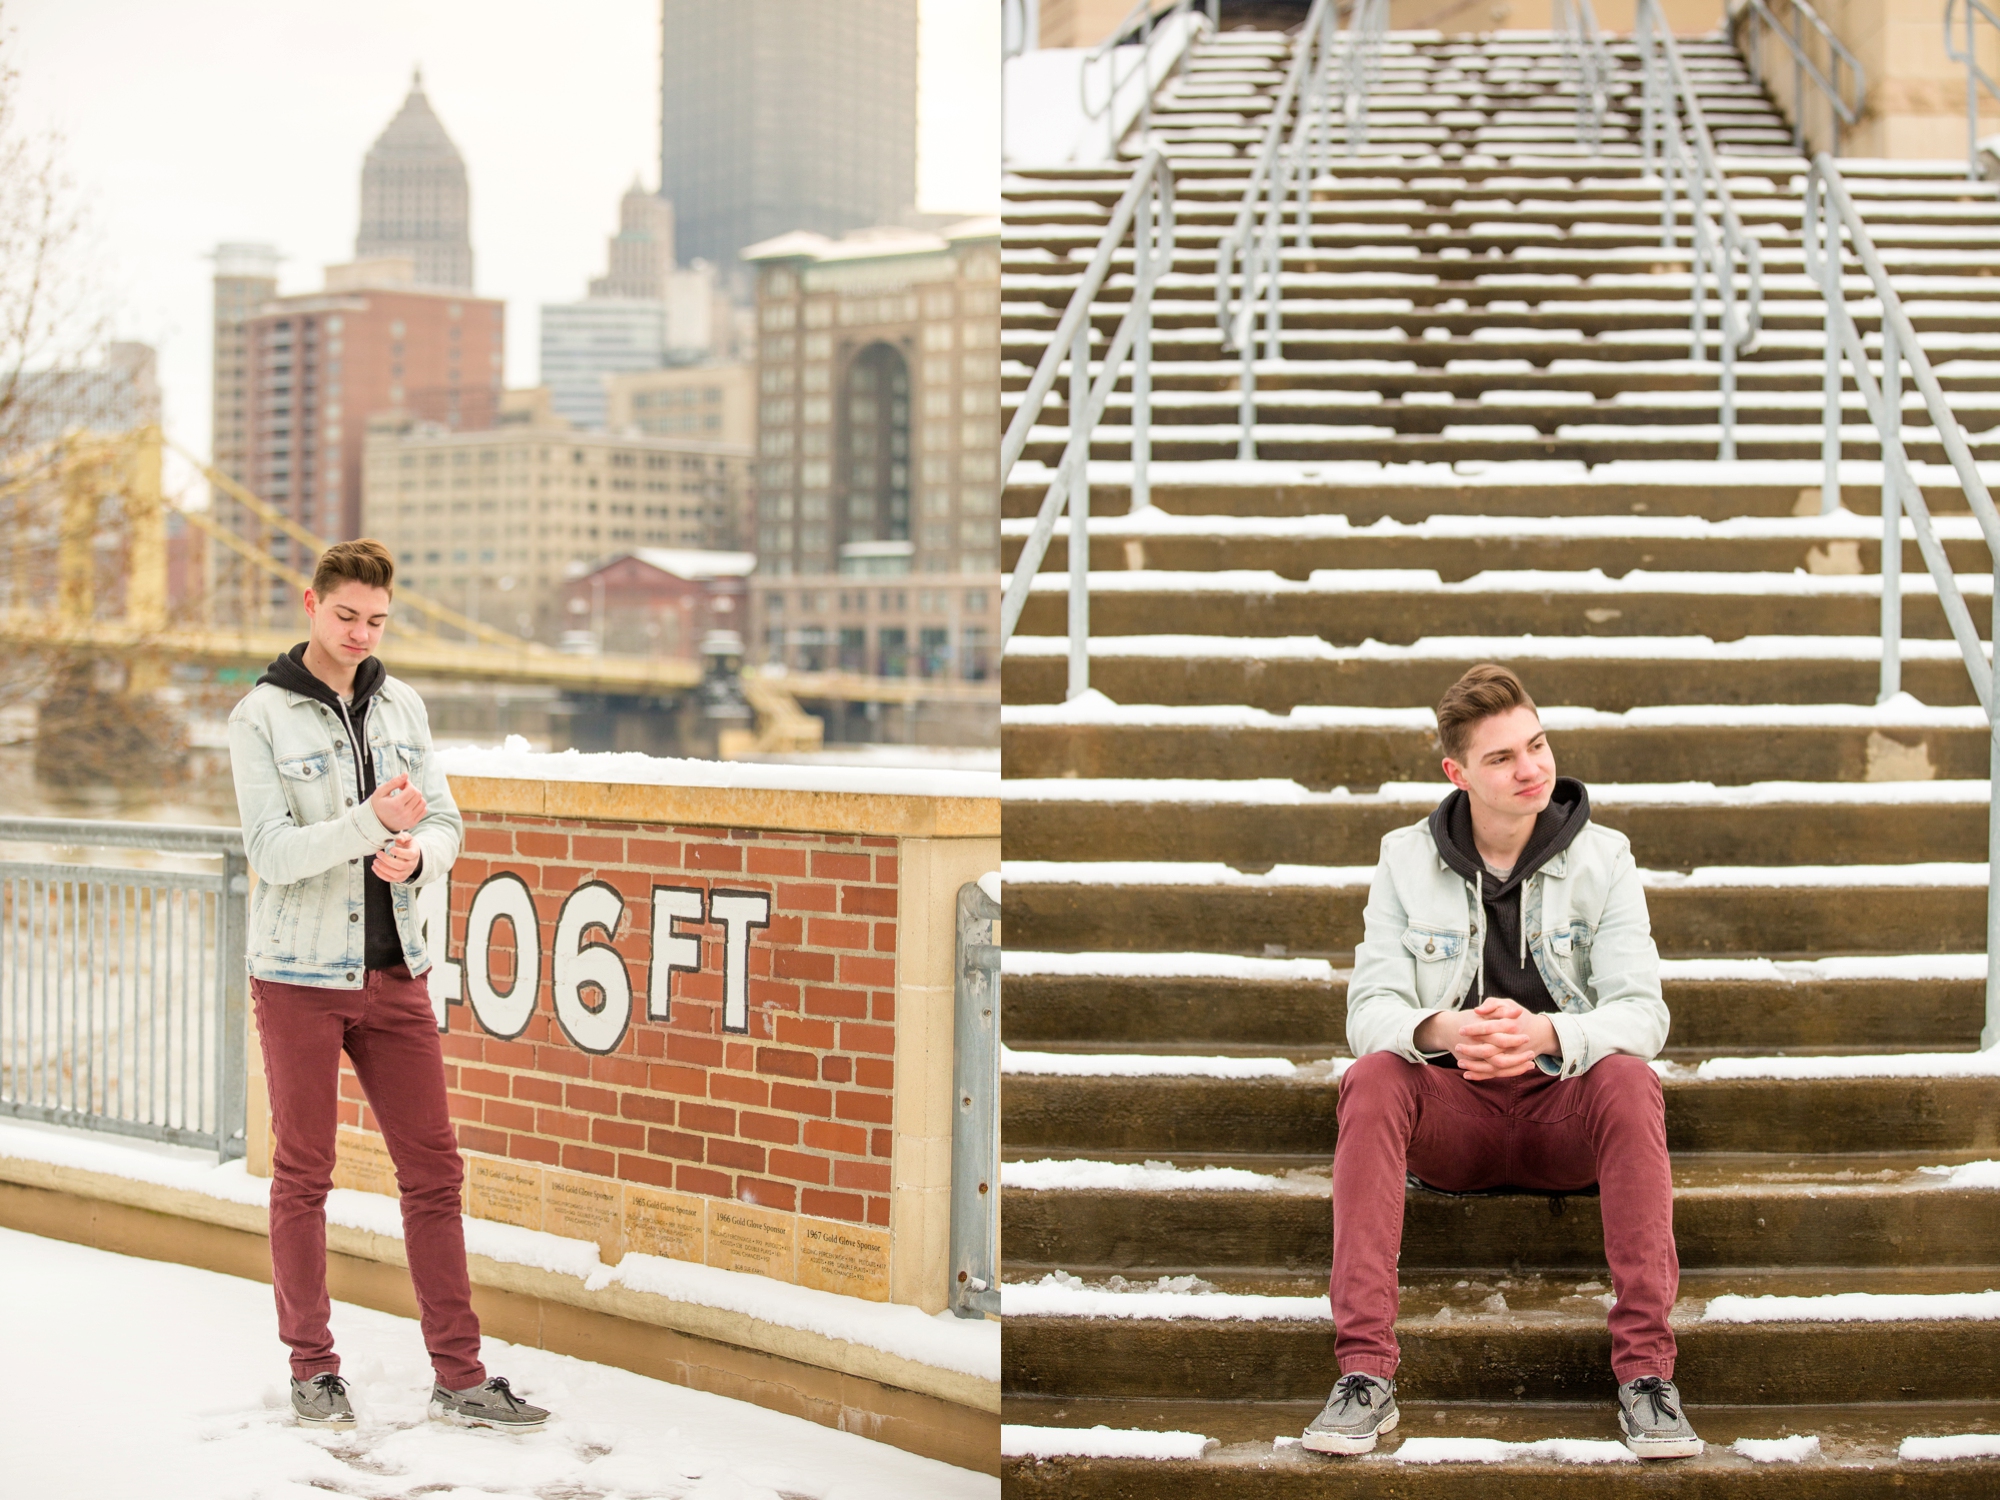 pittsburgh senior photographer, north shore senior pictures, downtown pittsburgh senior pictures, locations for photoshoot in pittsburgh, cranberry township senior photographer